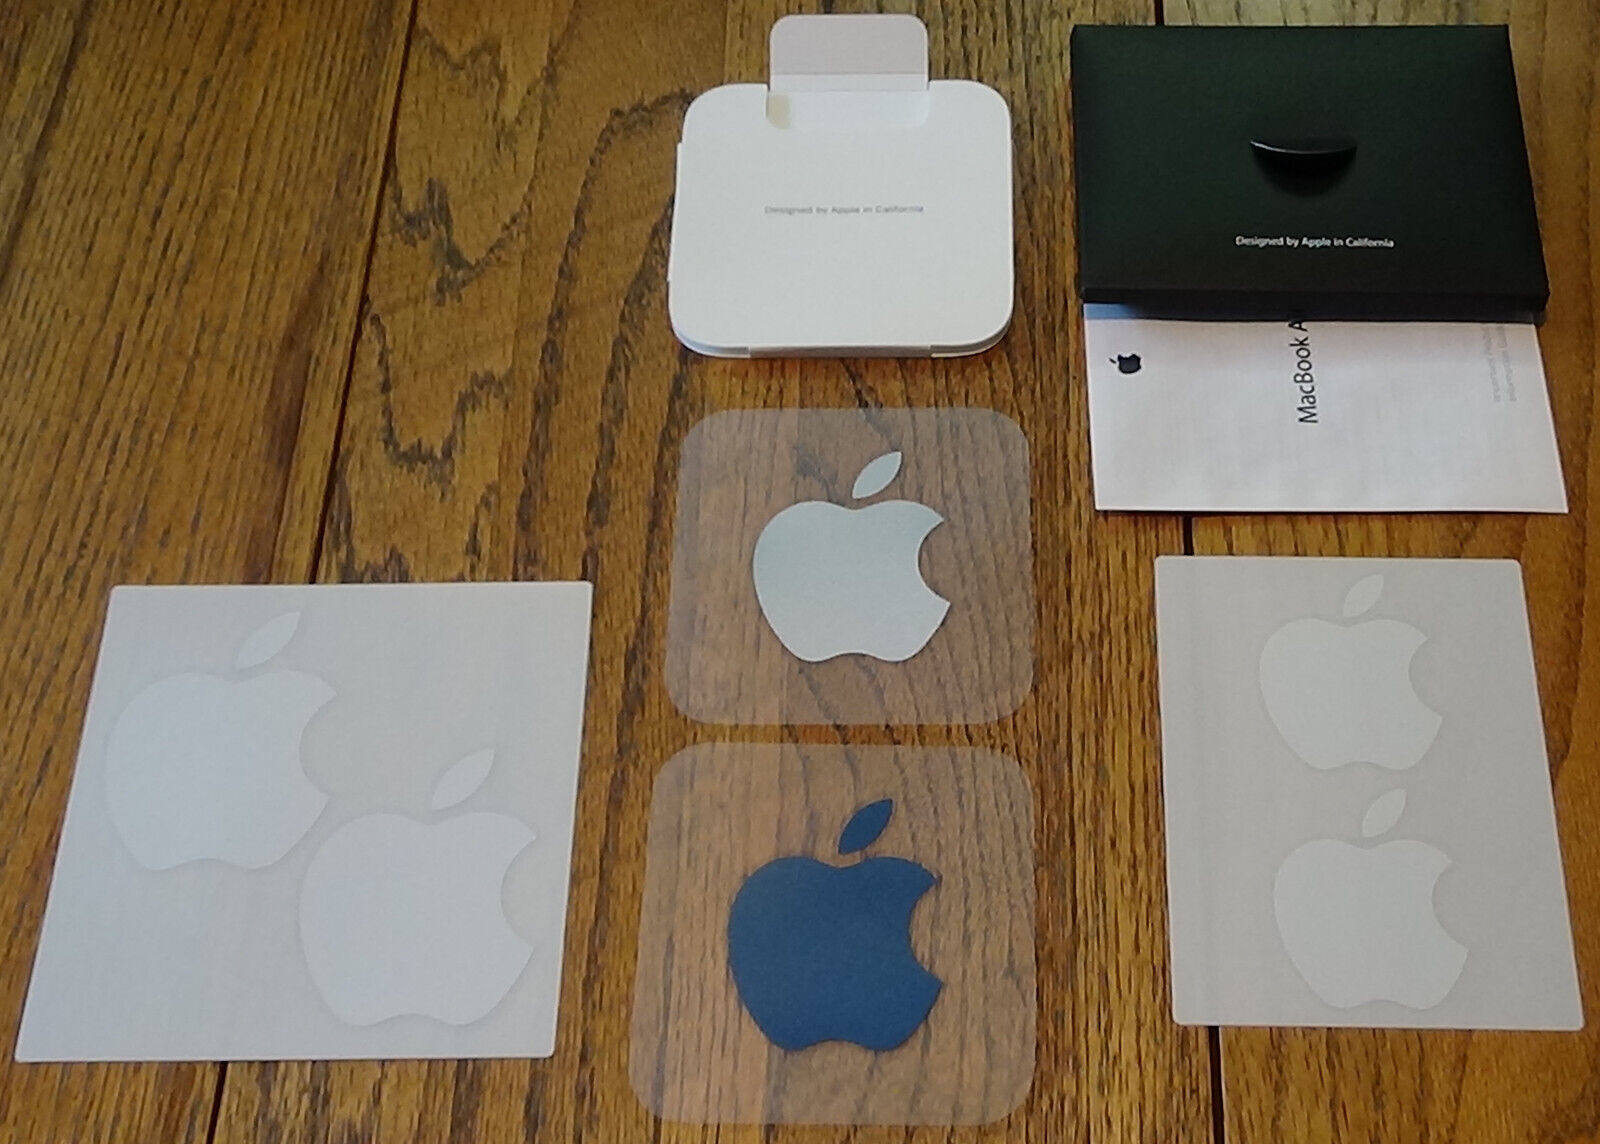 Apple Logo Stickers from three different Macs